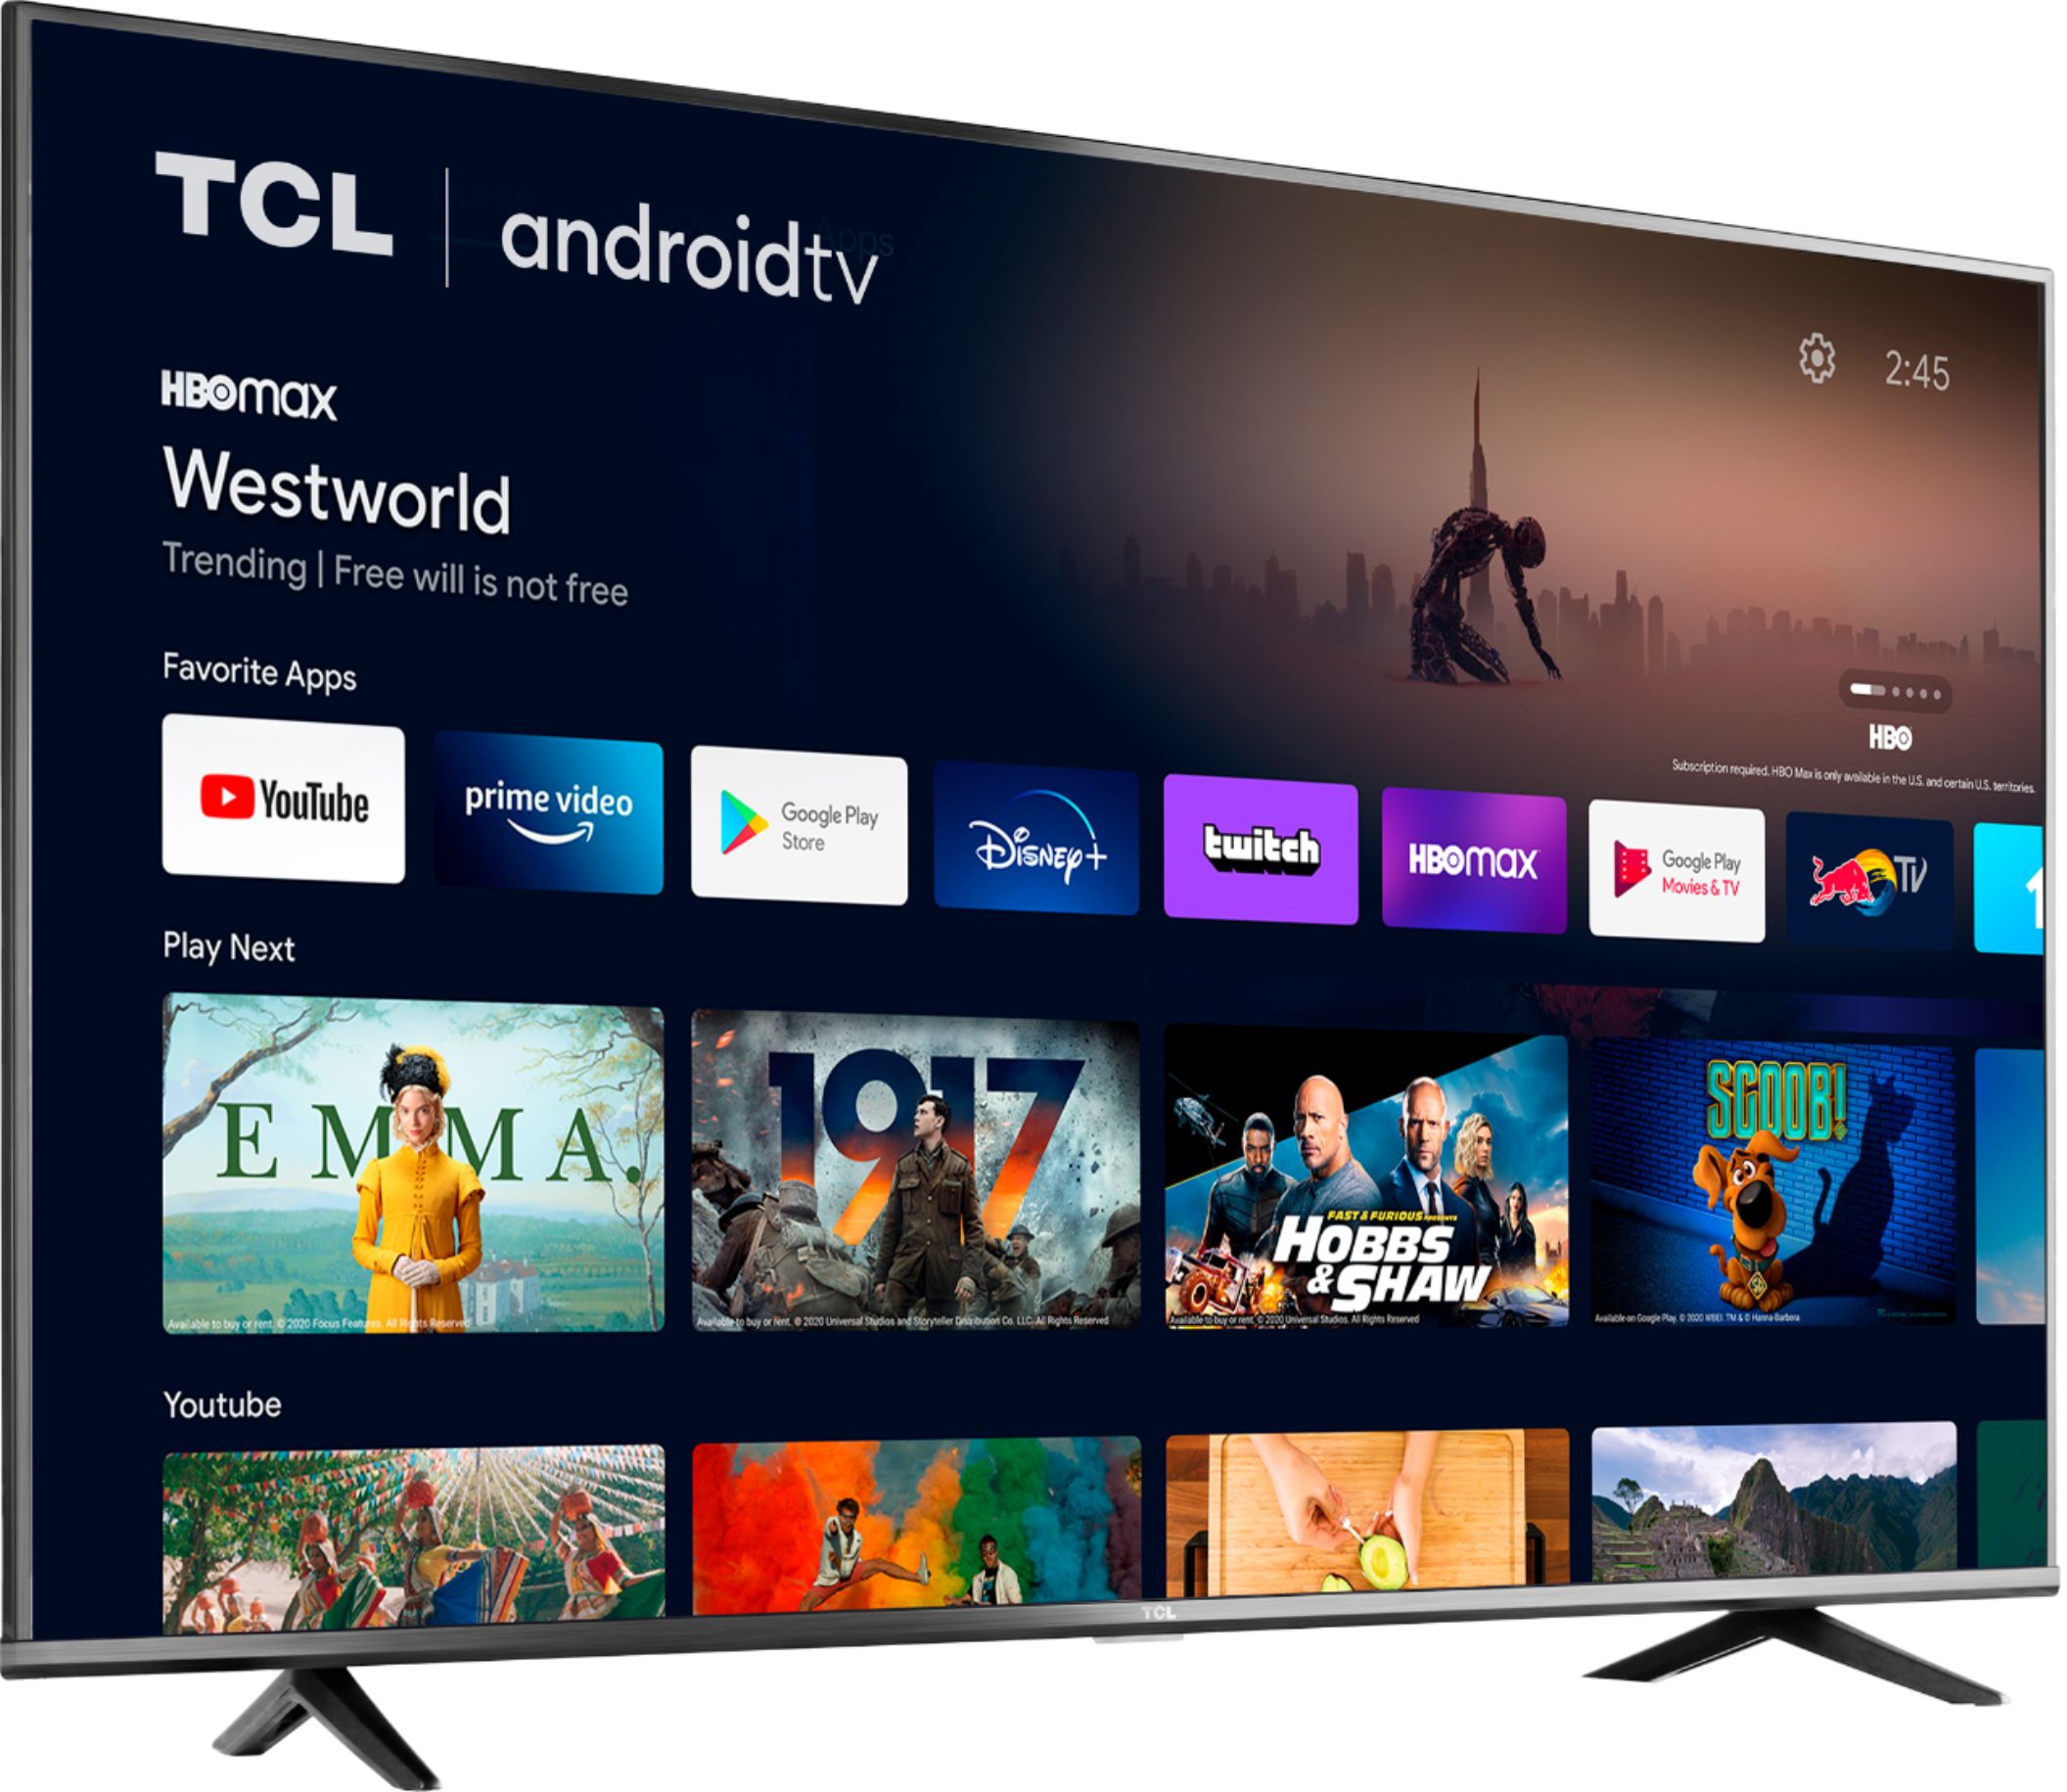 s running an unbelievable deal on TCL's 65-inch 4K TV